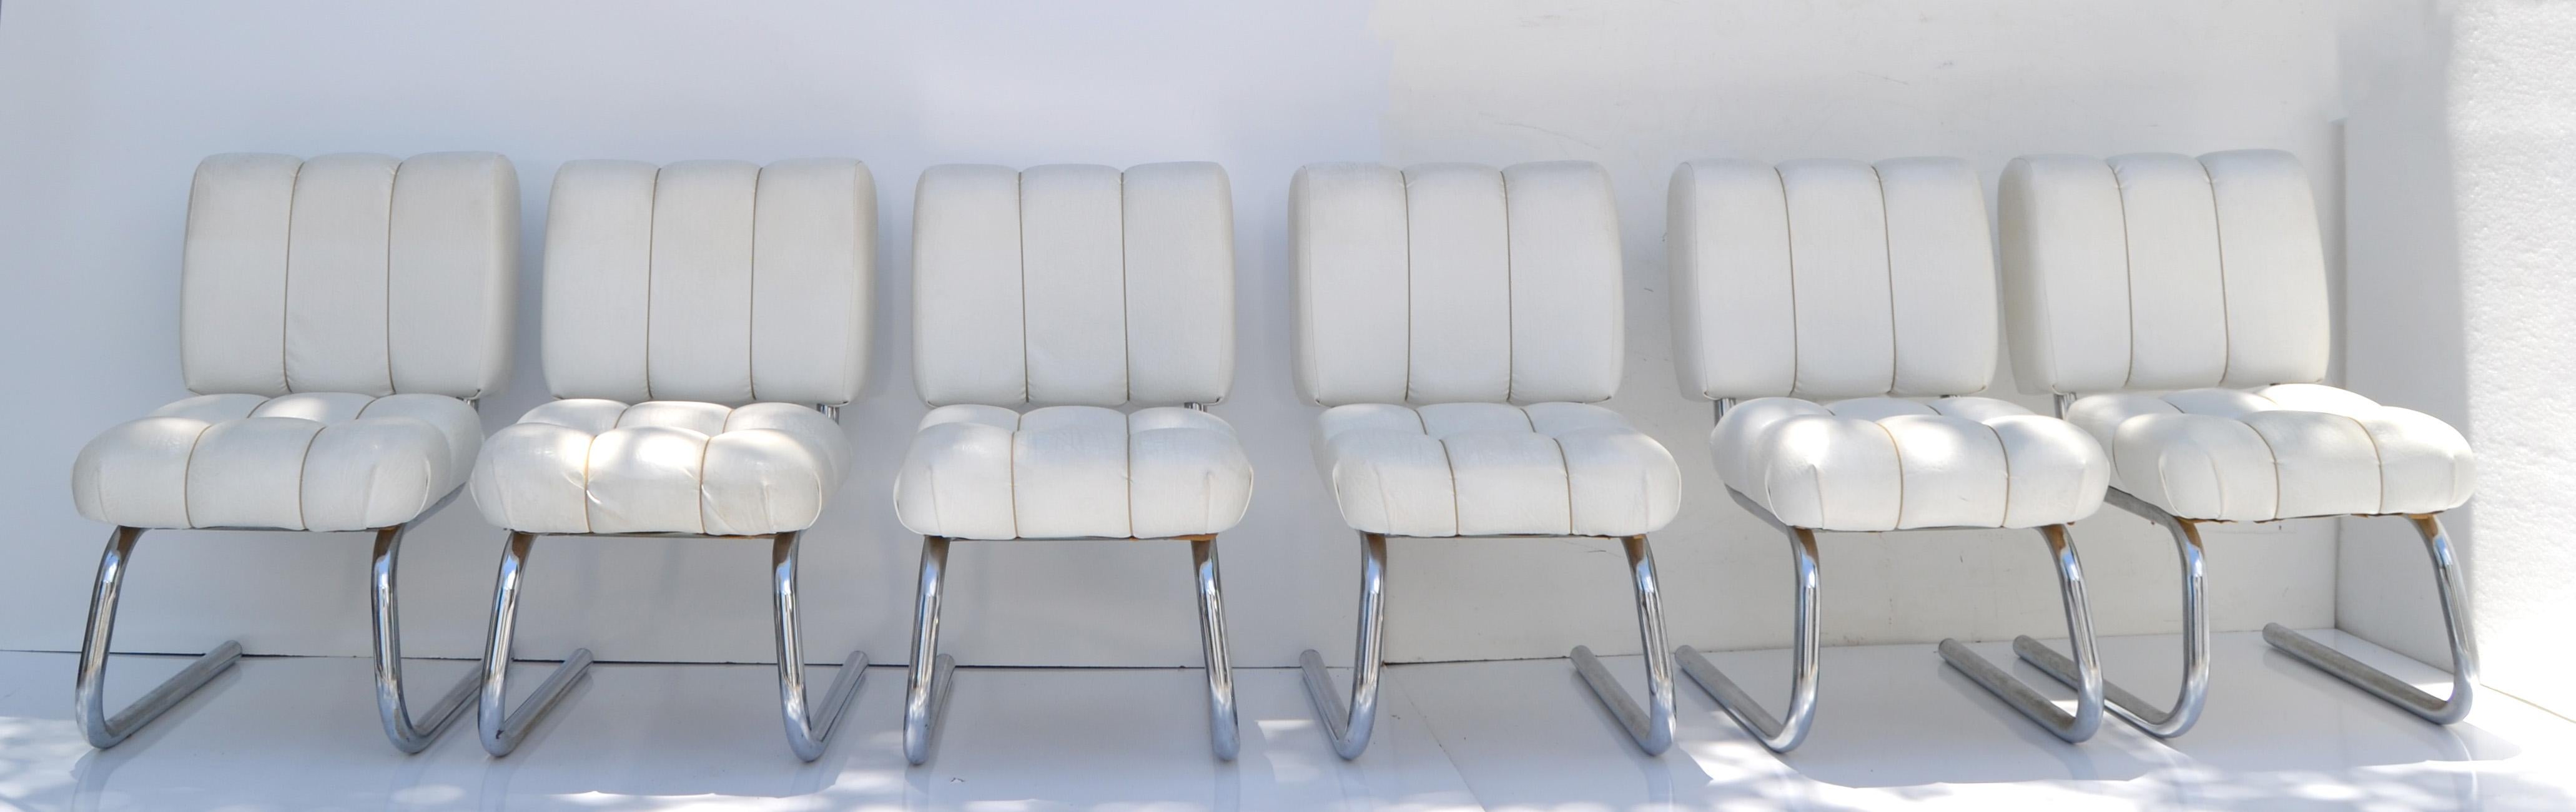 Superb set of 6 American tubular Chrome, Vinyl & Cord Cantilever Dining Chairs made by B. Brody Seating Company in the 1970s.
Very detailed Upholstery with Rope Squares to the Seats and down-line Backrest in De Sede Style.
All original condition